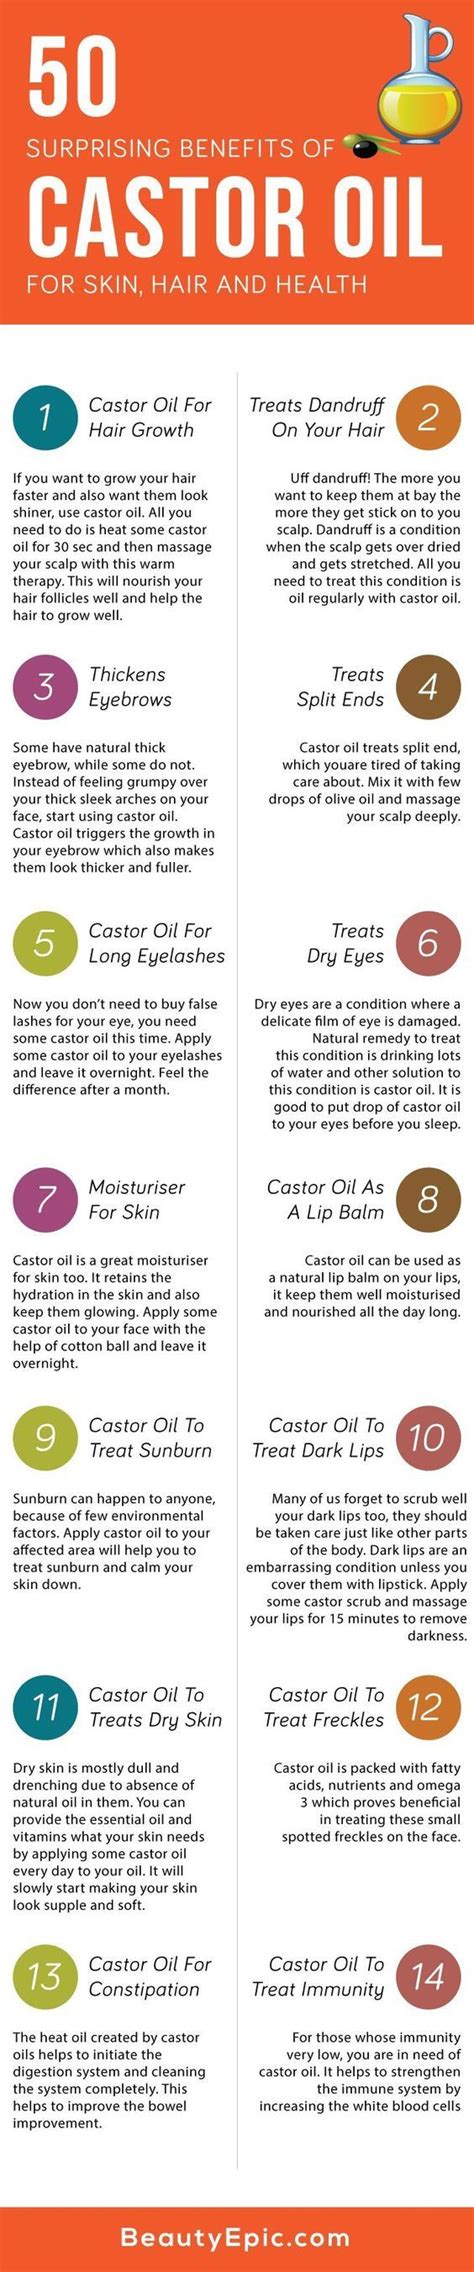 Benefits Of Castor Oil Pictures Photos And Images For Facebook Tumblr Pinterest And Twitter